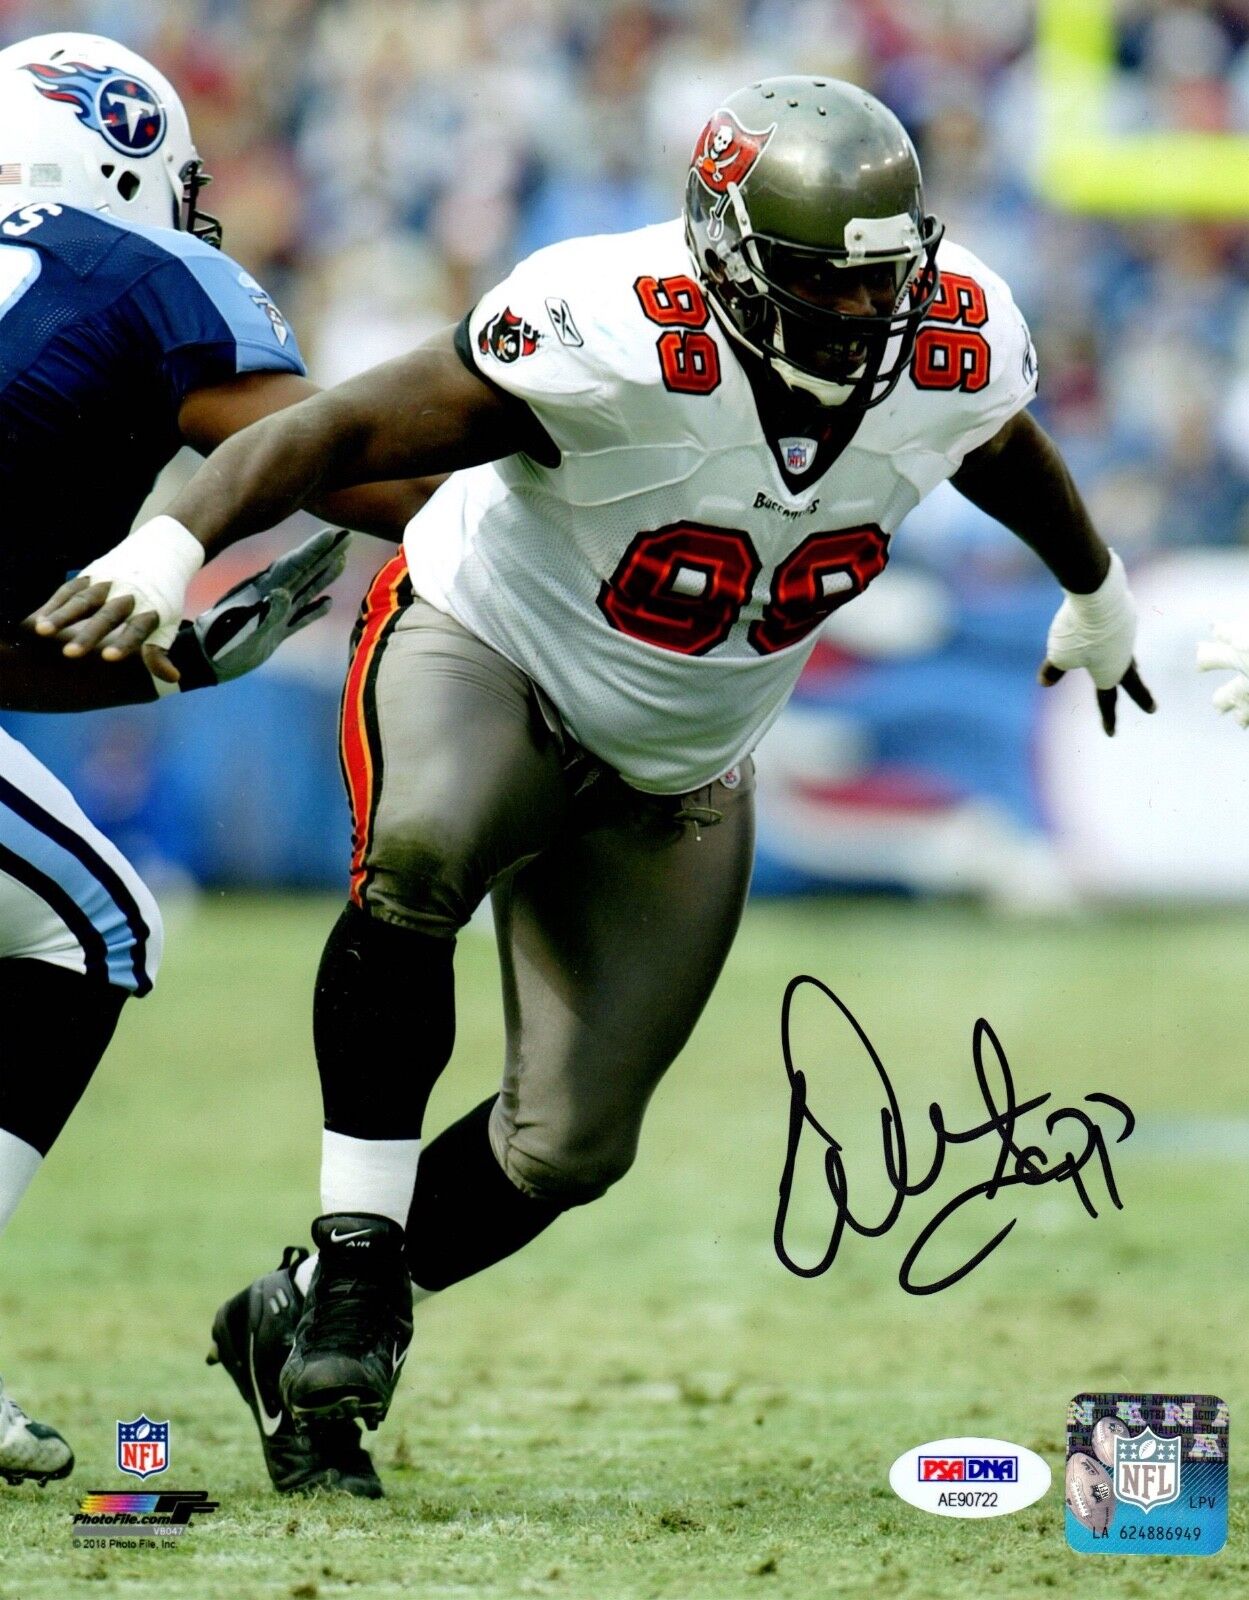 Warren Sapp autographed signed 8x10 NFL Tampa Bay Buccaneers PSA Photo Poster painting File